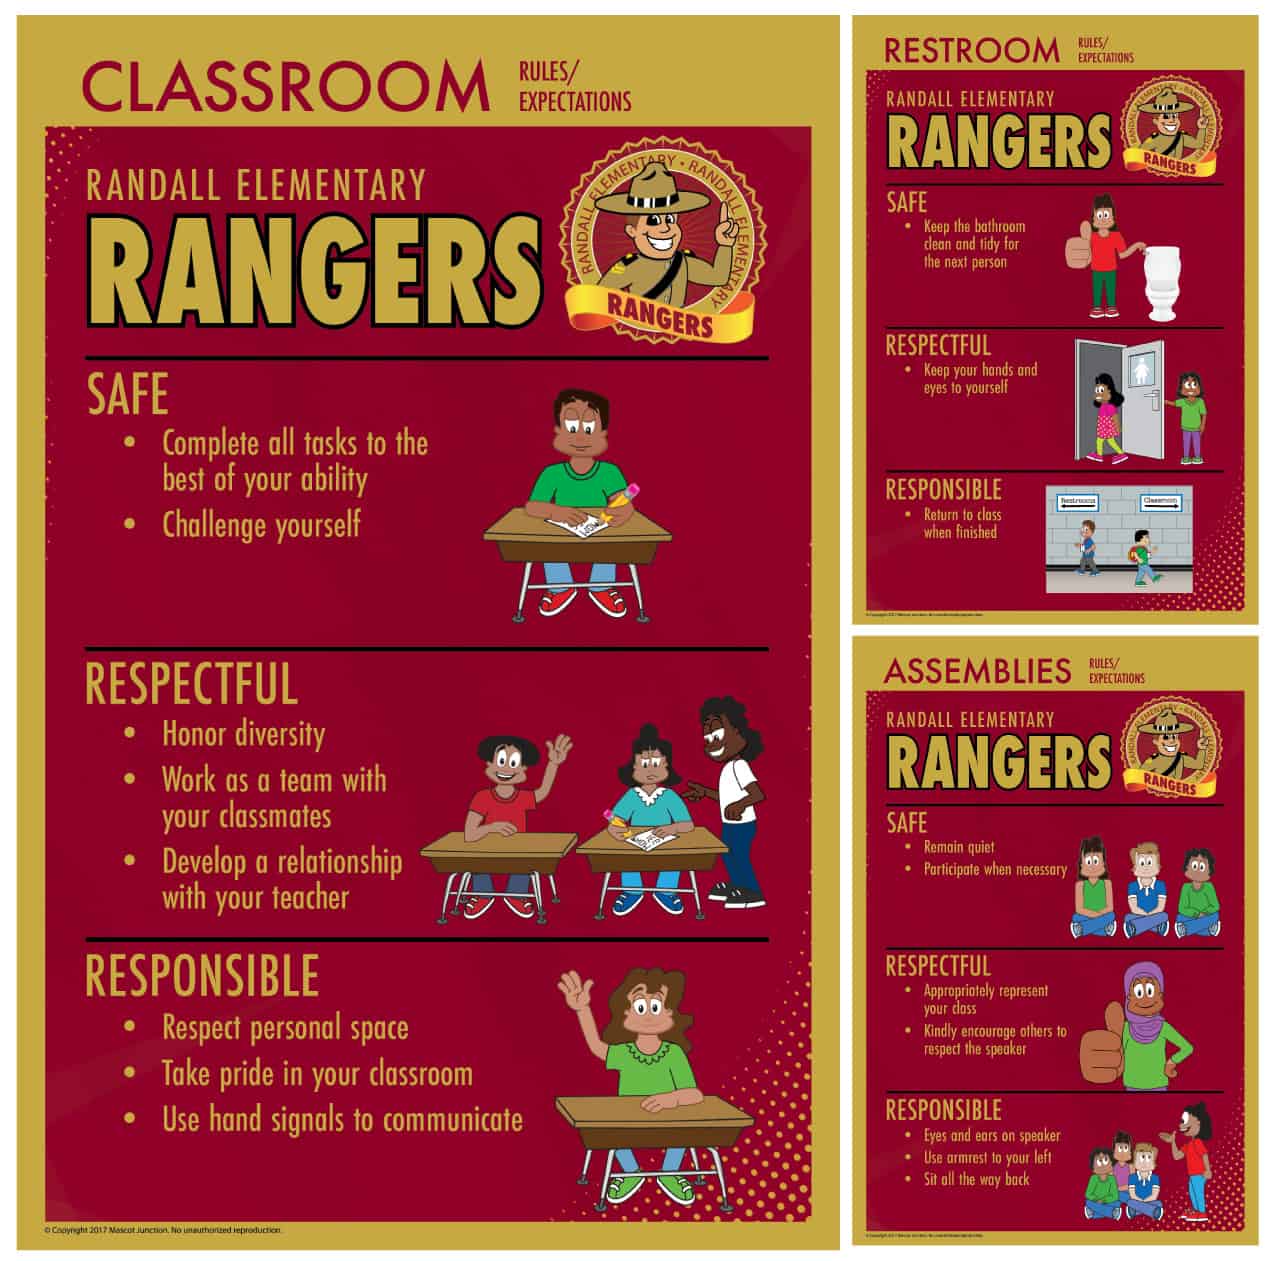 Rules-posters_ranger